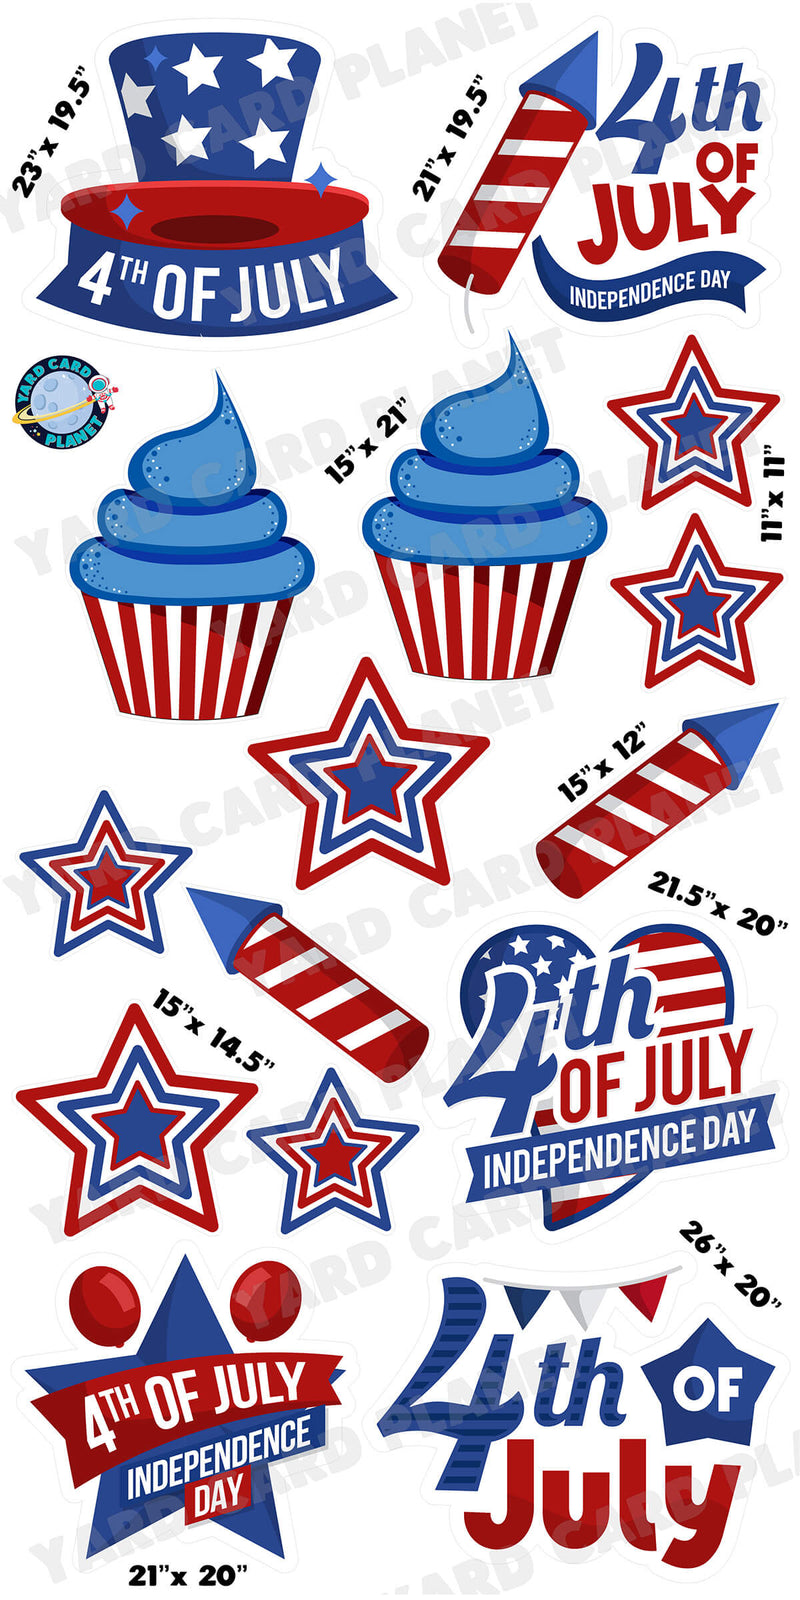 4th of July Independence Day Signs, Cupcakes, Stars and Fireworks Yard Card Flair Set